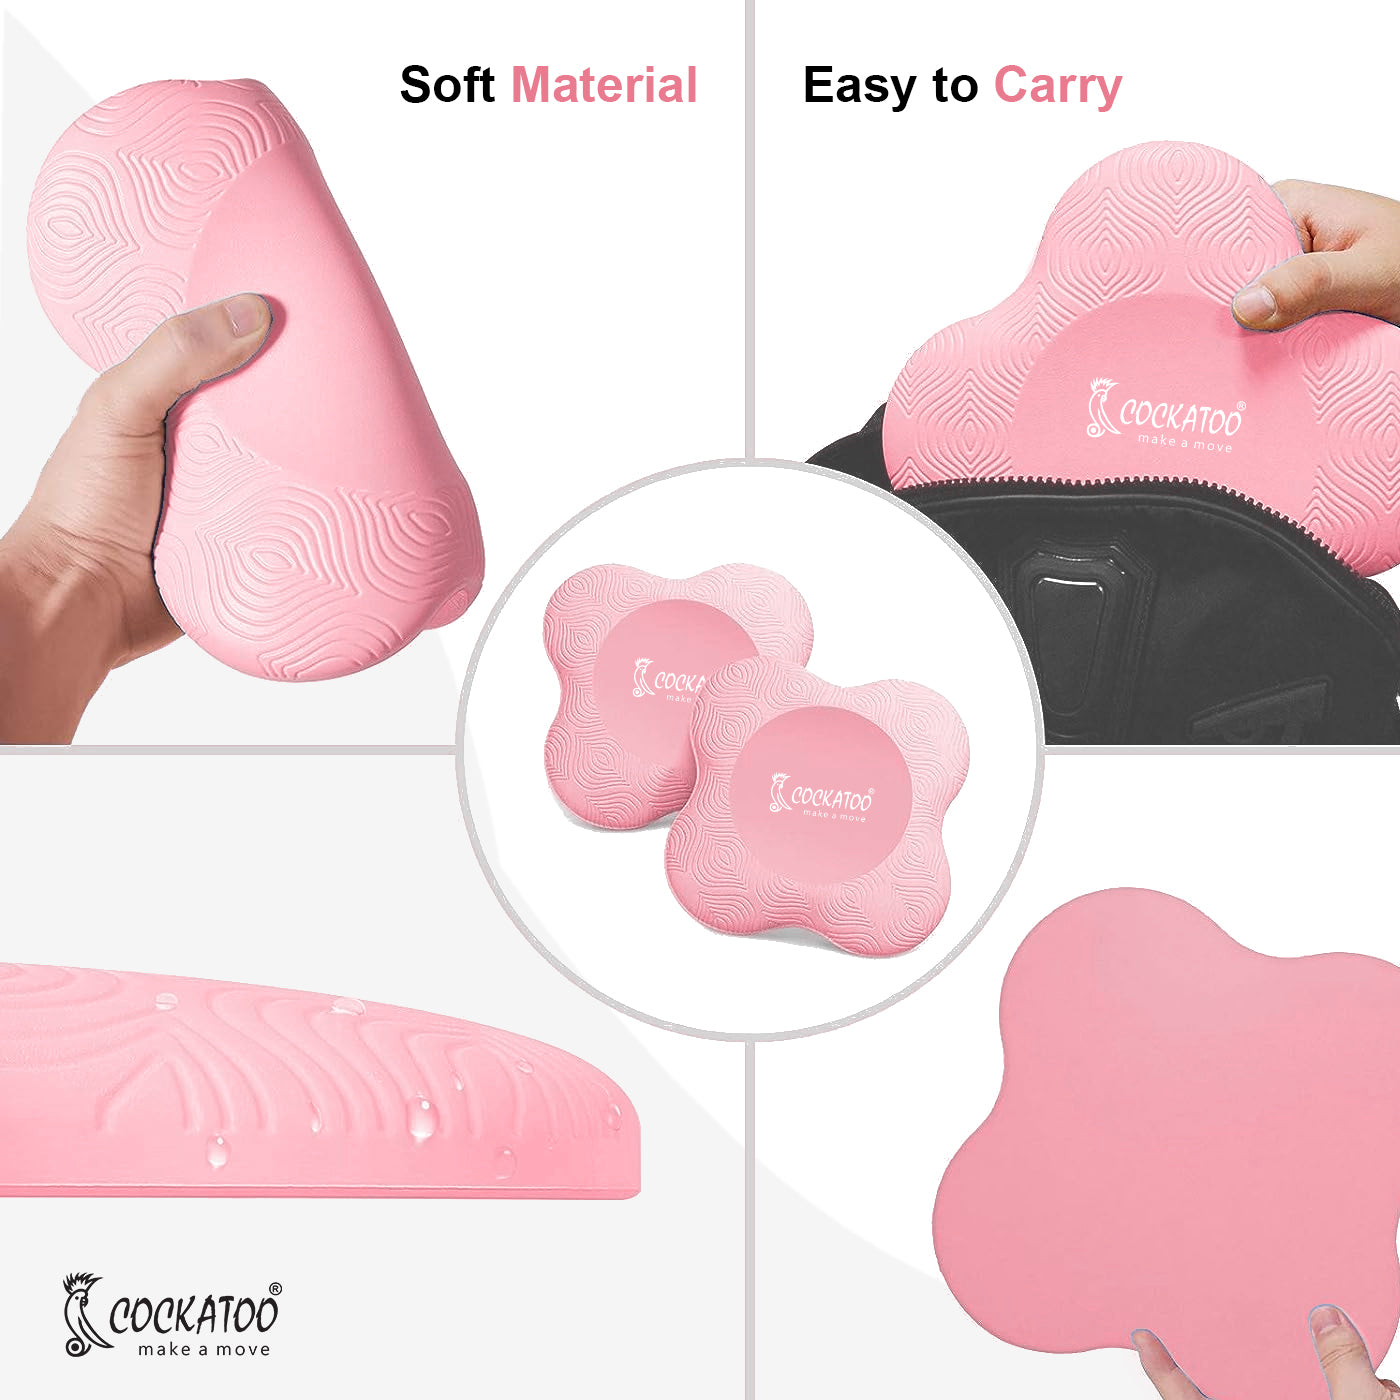 "Cockatoo 20MM Knee & Elbow Cushion Pad: Premium Support and Comfort for Your Workouts